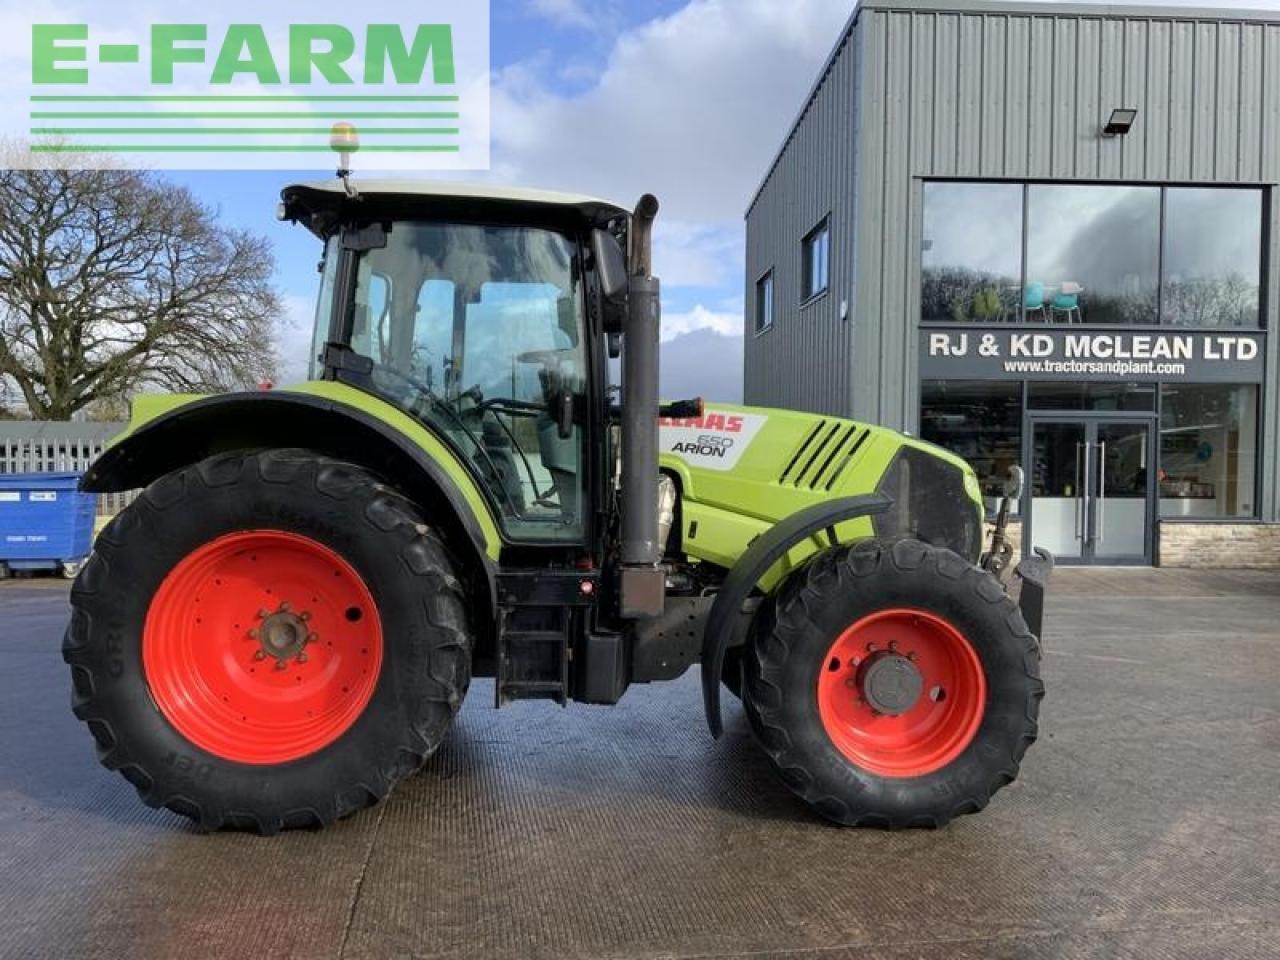 Farm tractor CLAAS 650 arion tractor (st15805)